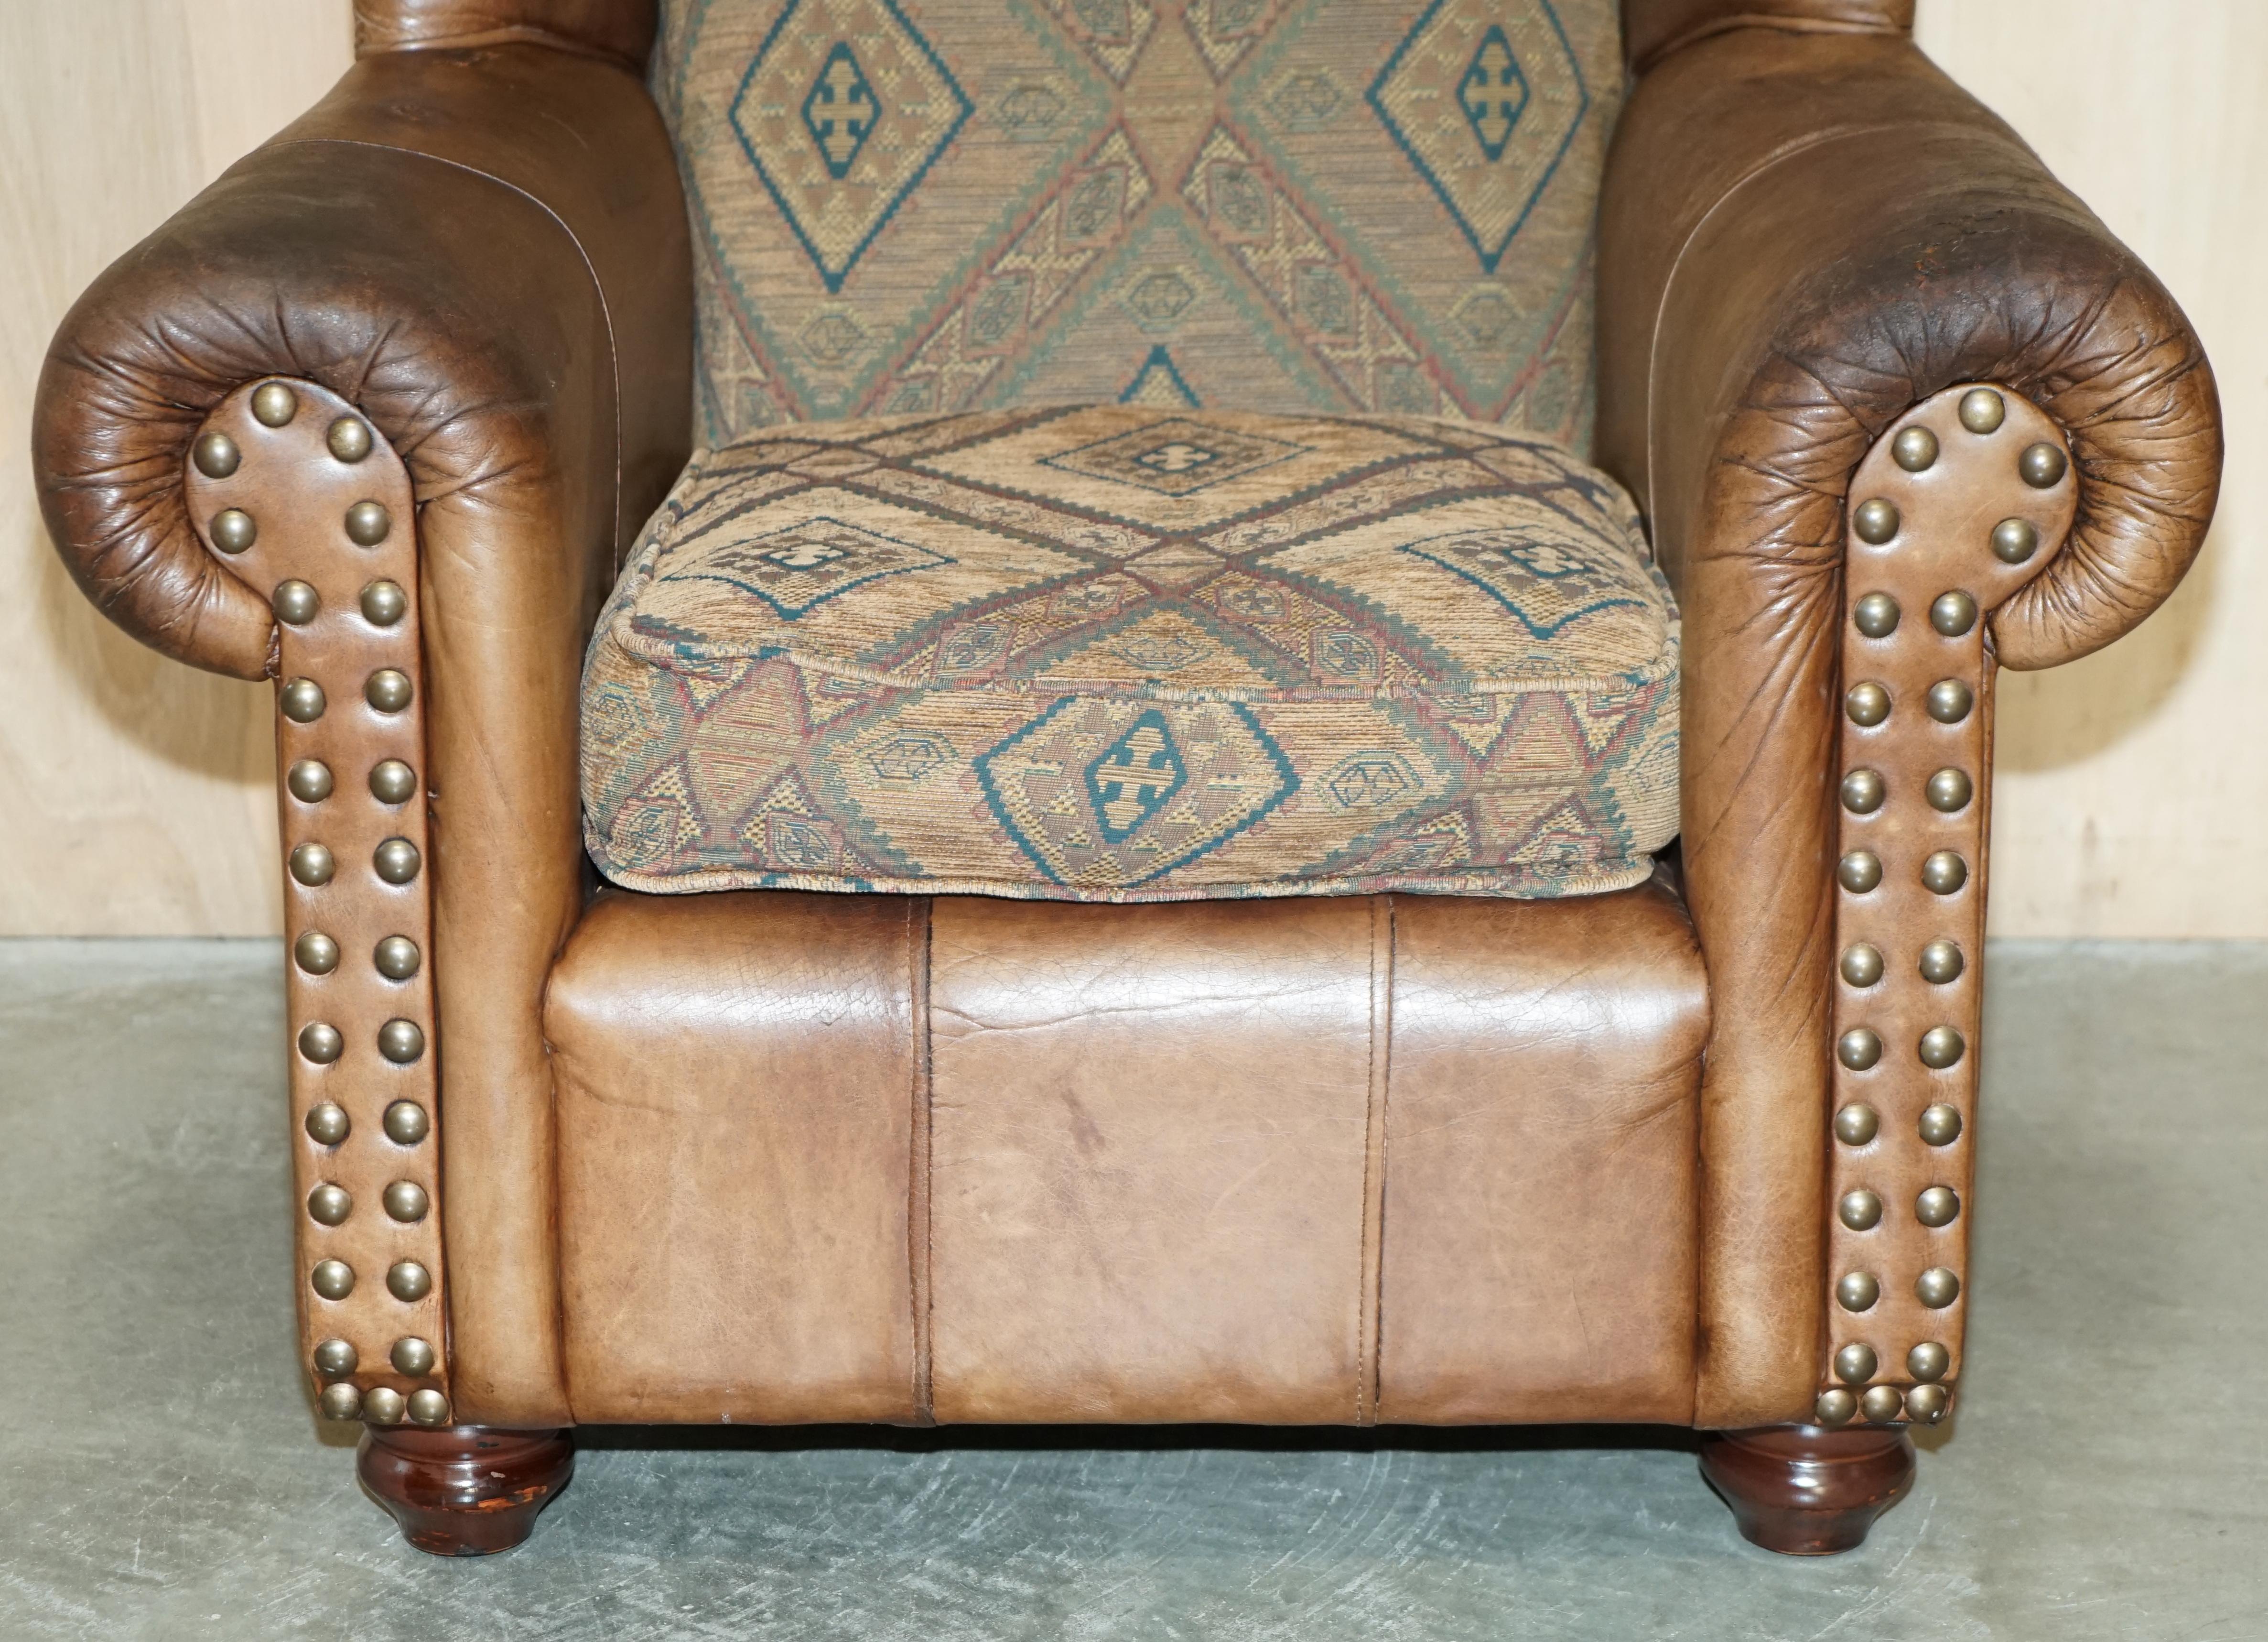 20th Century PAIR OF ViNTAGE THOMAS LLOYD BROWN LEATHER KILIM ARMCHAIRS FROM SCOTTISH CASTLe